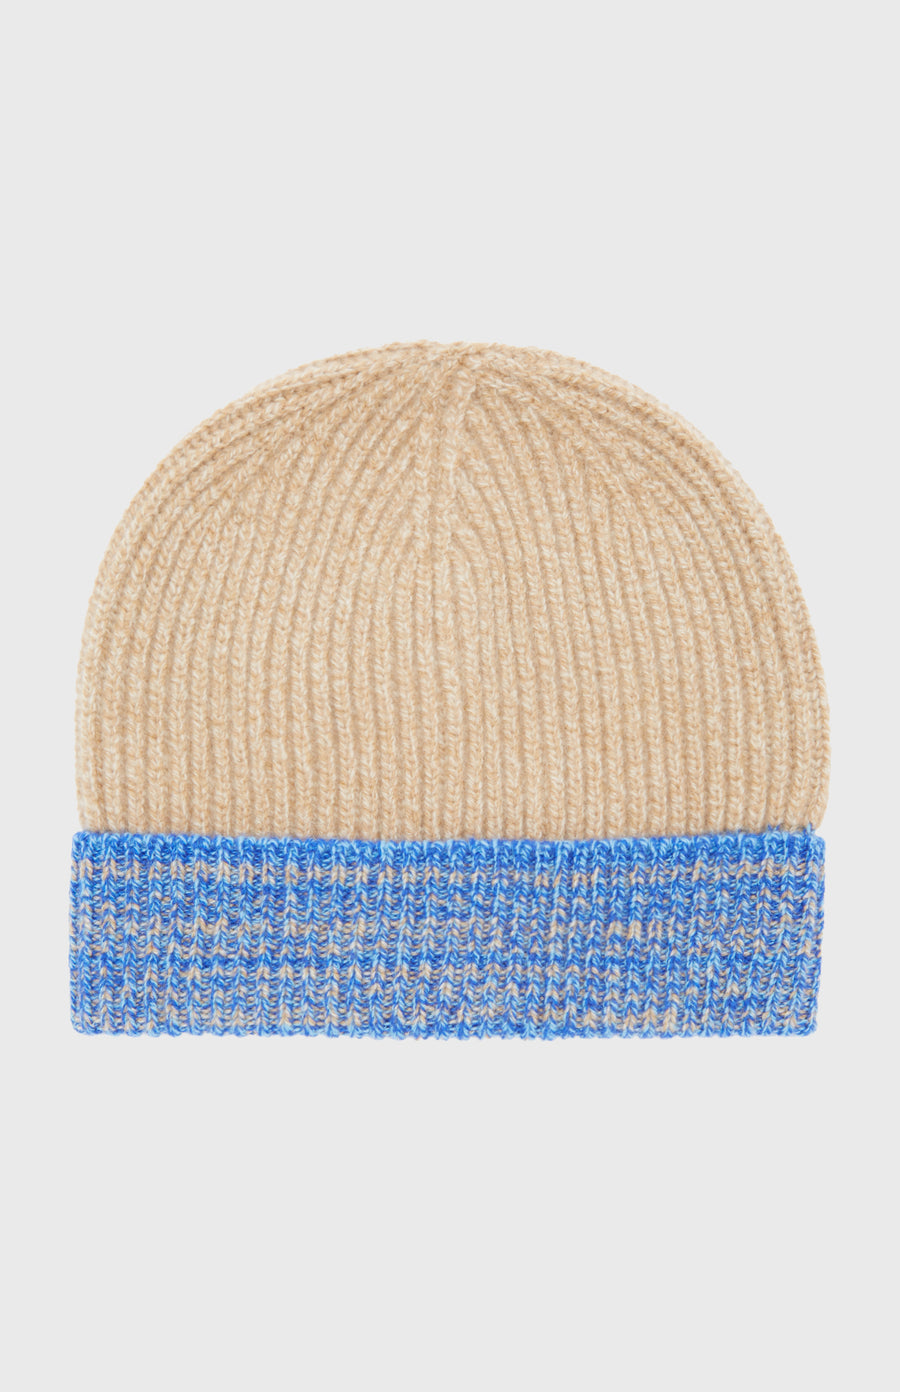 Men's Lambswool Beanie in Camel and Cobalt - Pringle of Scotland